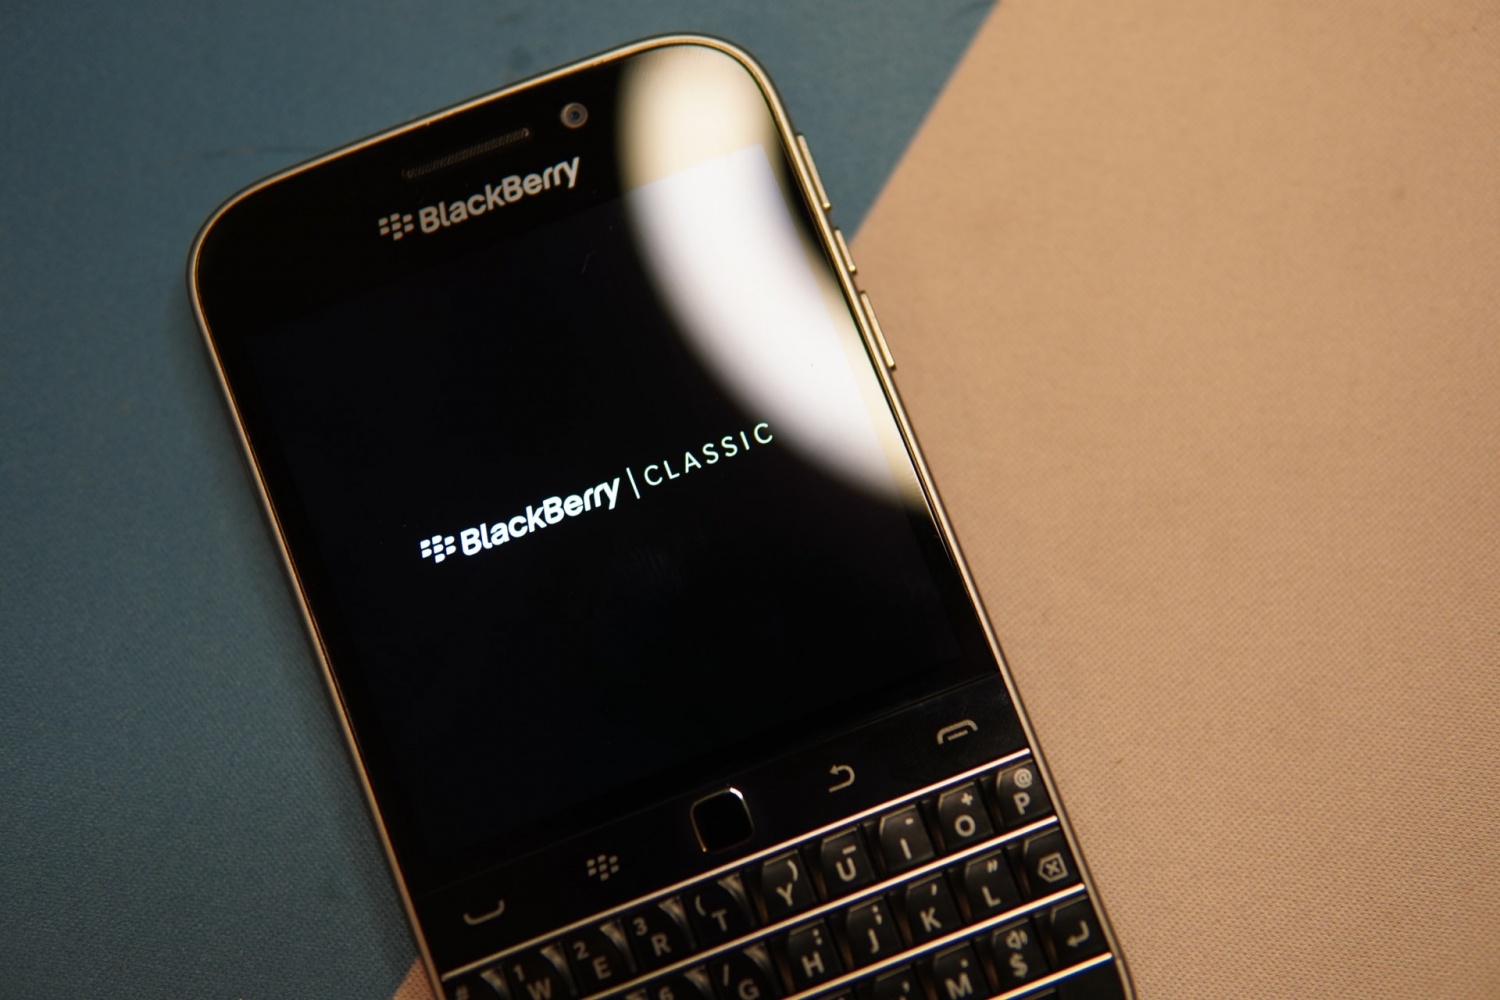 BlackBerry Devices are Officially Ending | Key Services, Network Provisions to Shut Down on January 4, 2022